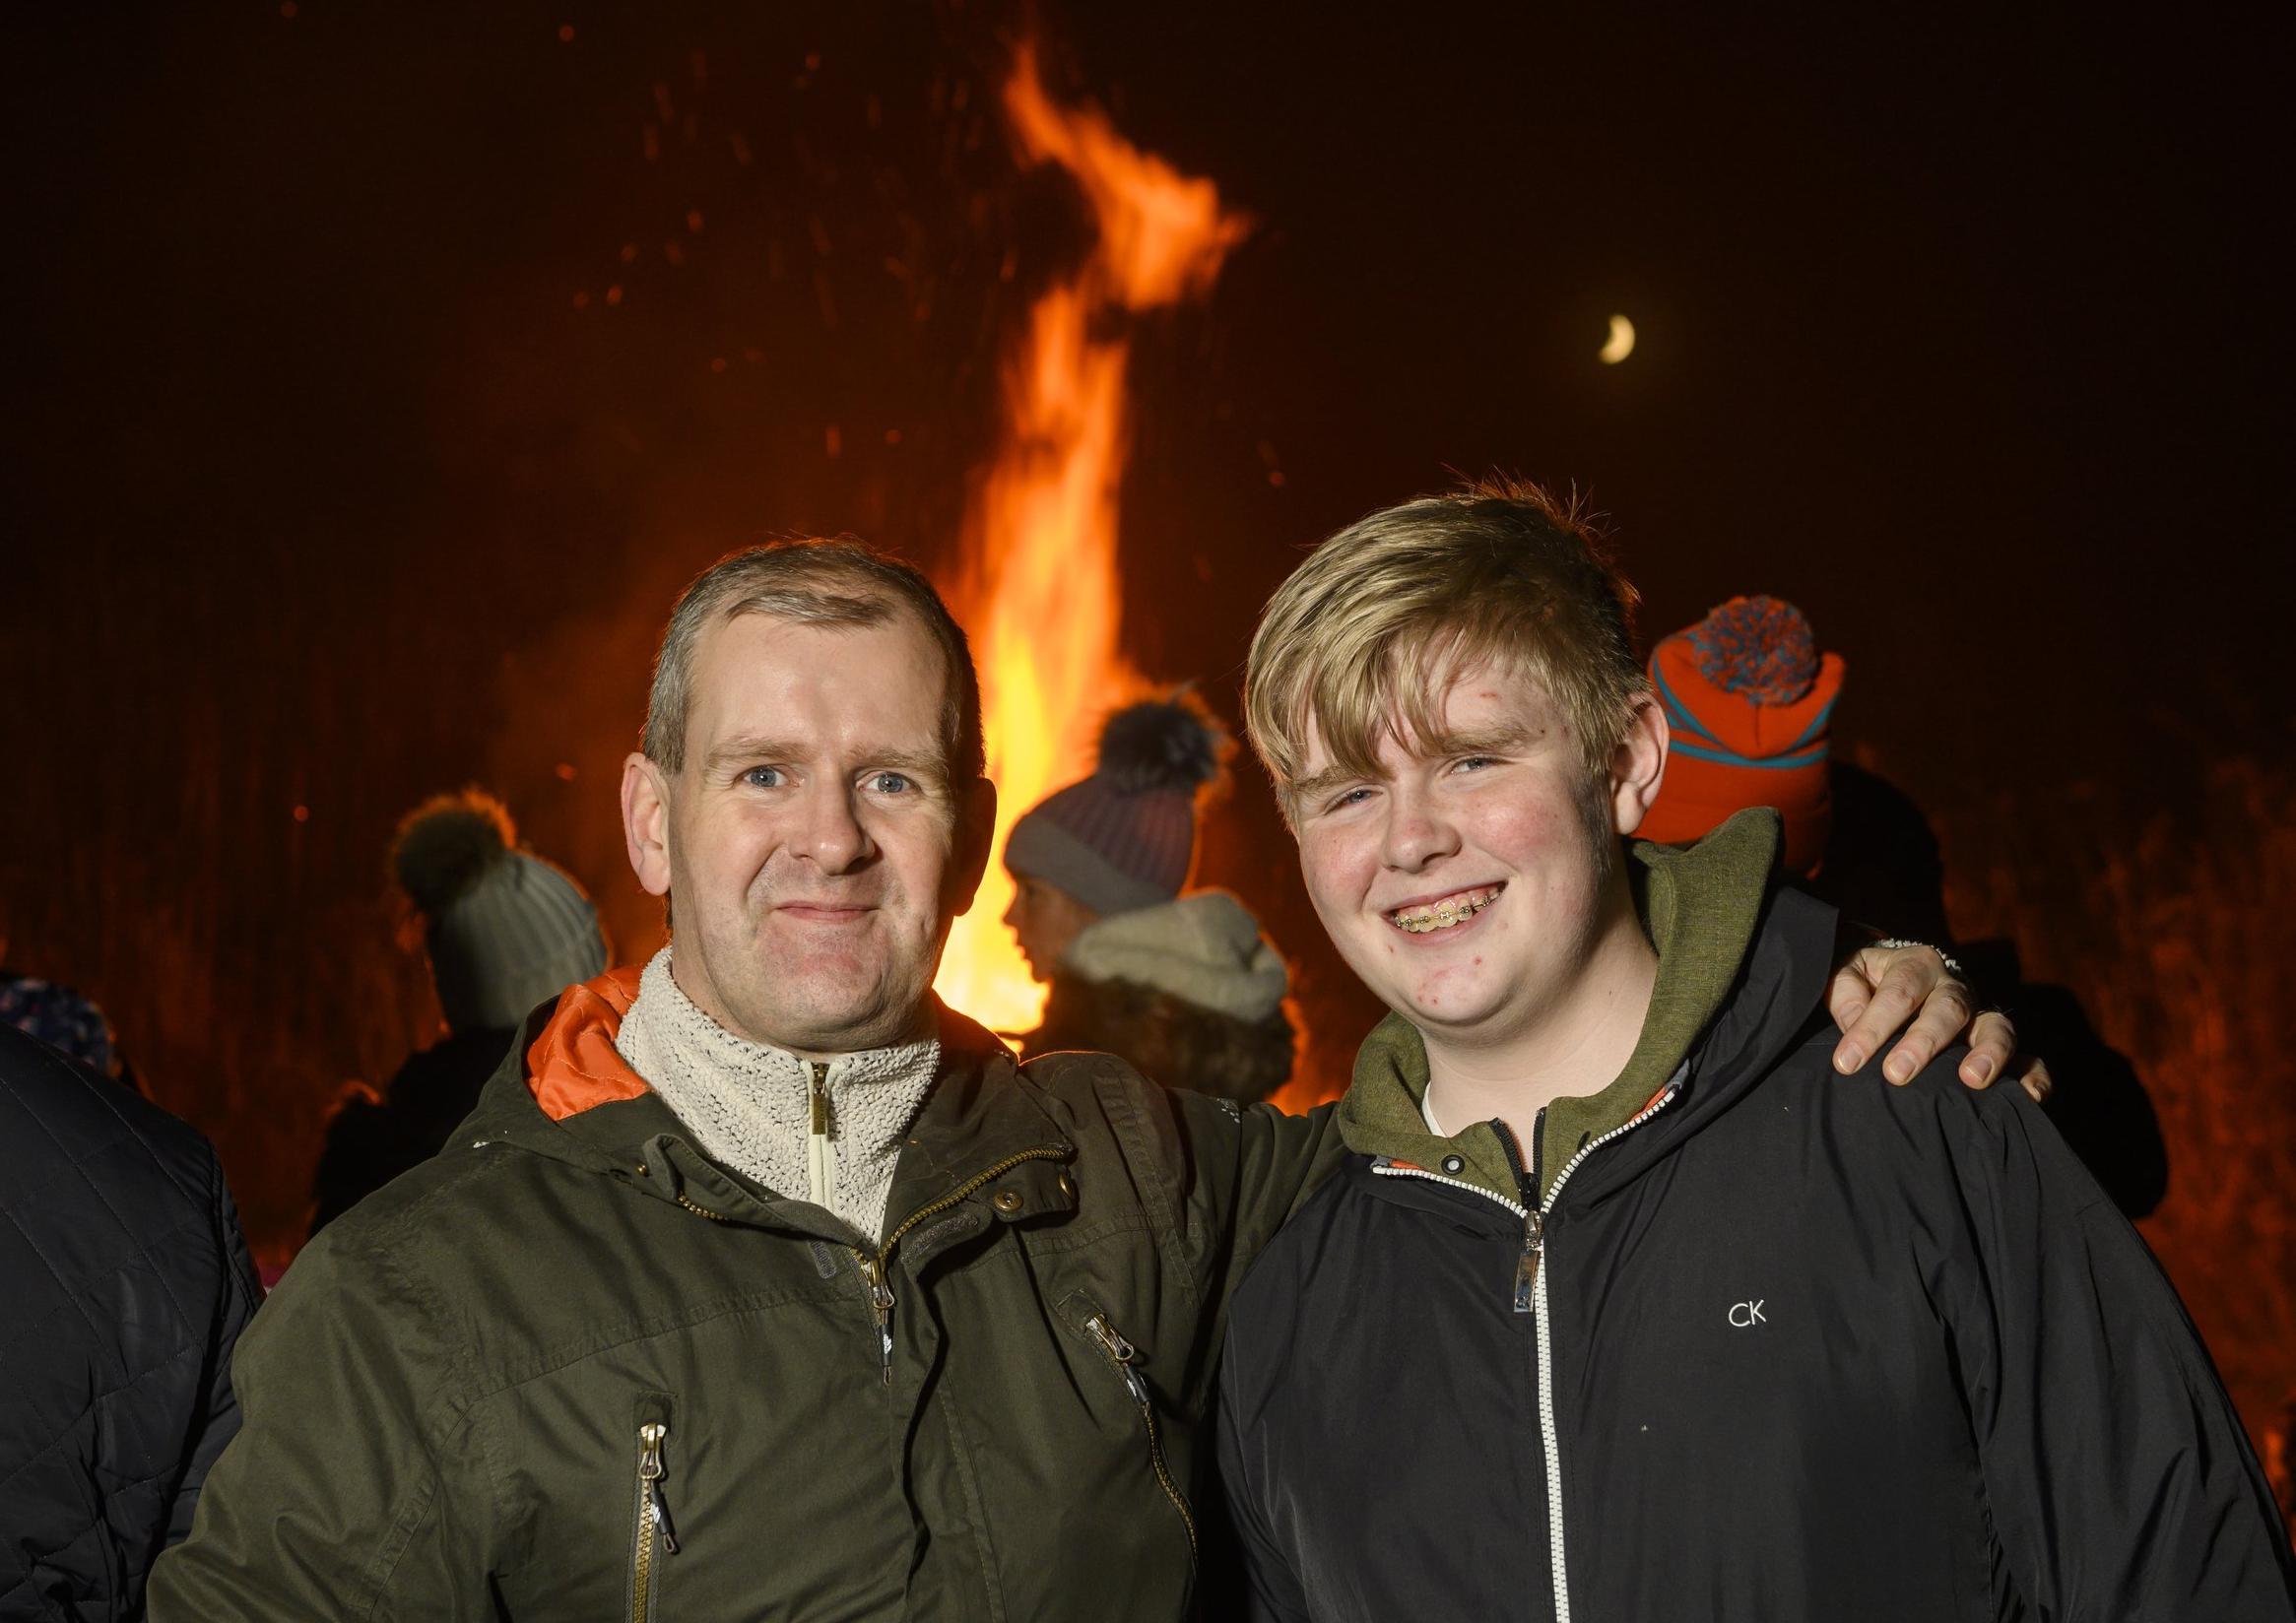 Lauder fireworks display 2019

Jamie and James Herd from Earlston.

Pic Phil Wilkinson 
info@philspix.com